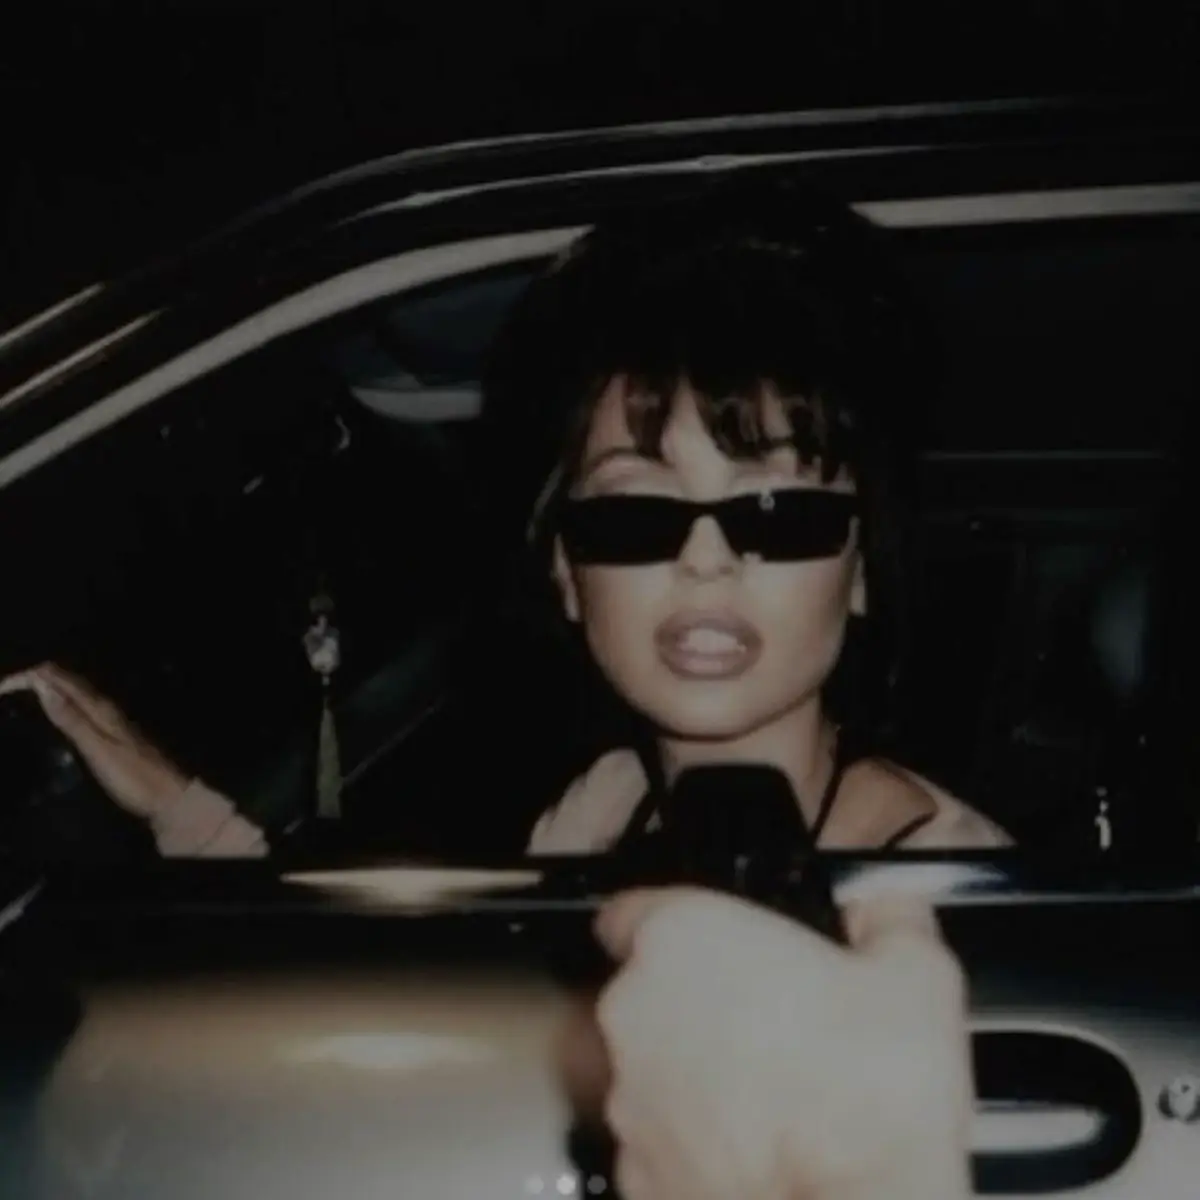  A woman wearing sunglasses and a black shirt is sitting in a car.